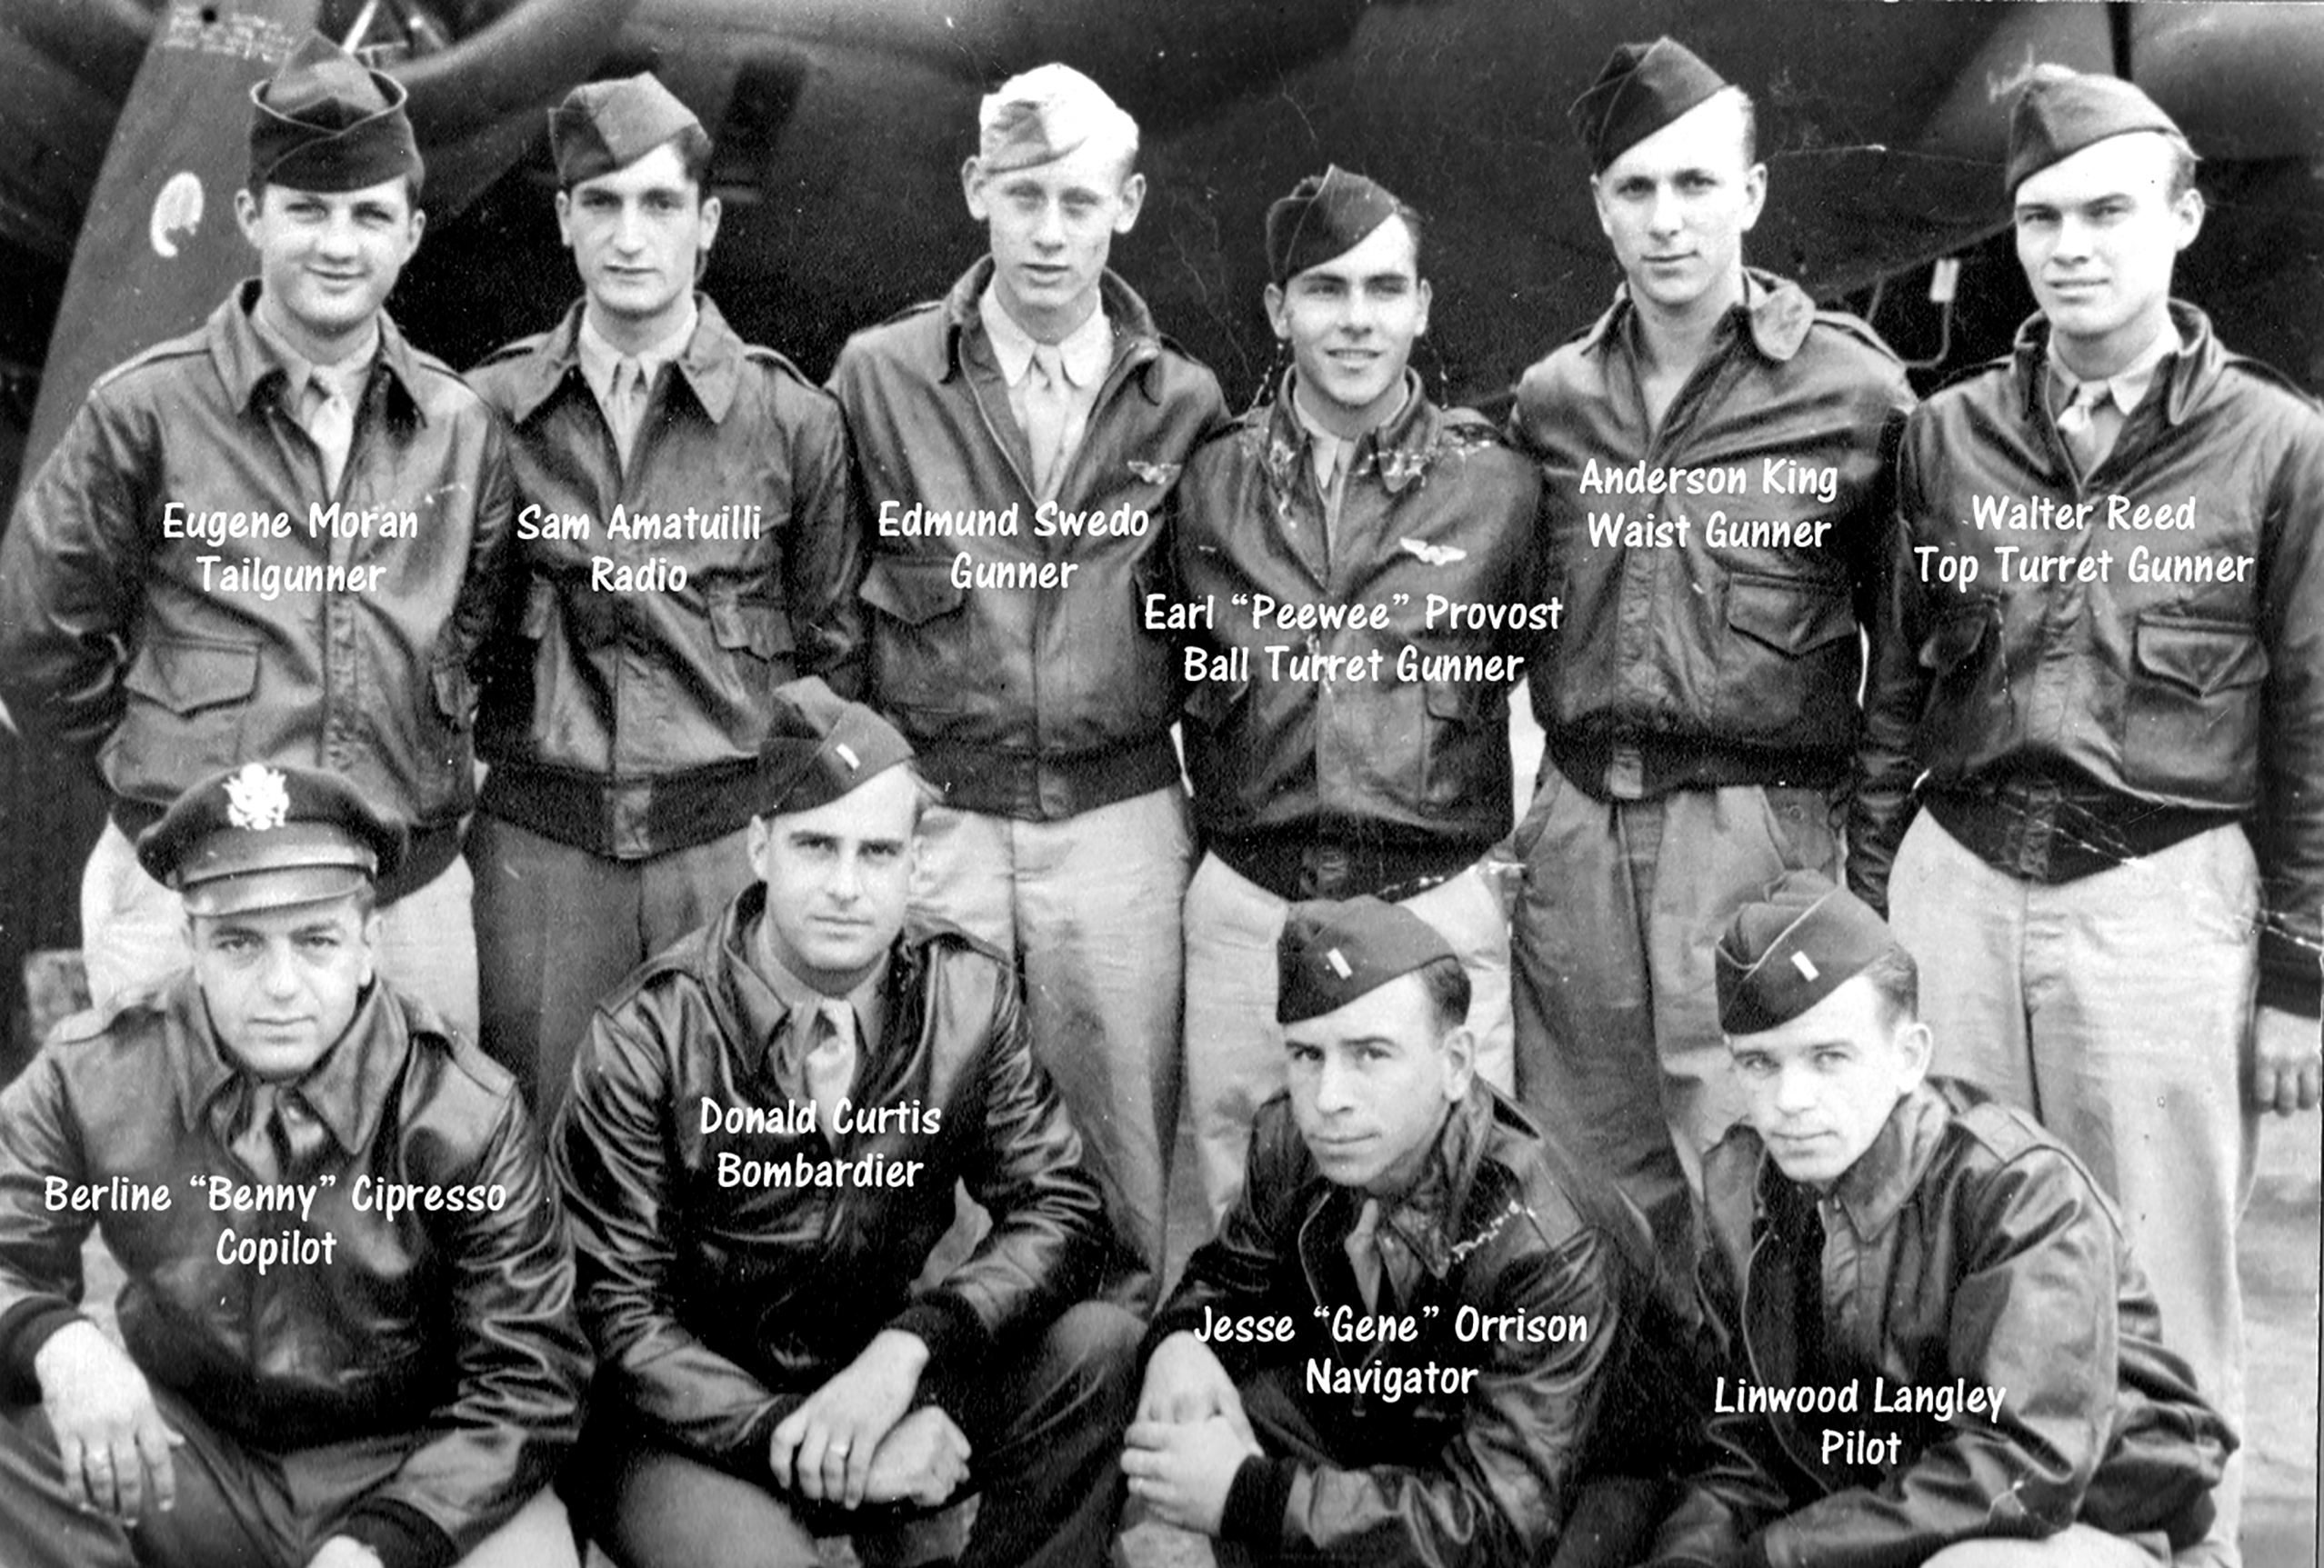 The crew of a bomber that Gene Moran flew on in World War II. The 10 men pose in the black and white photo.